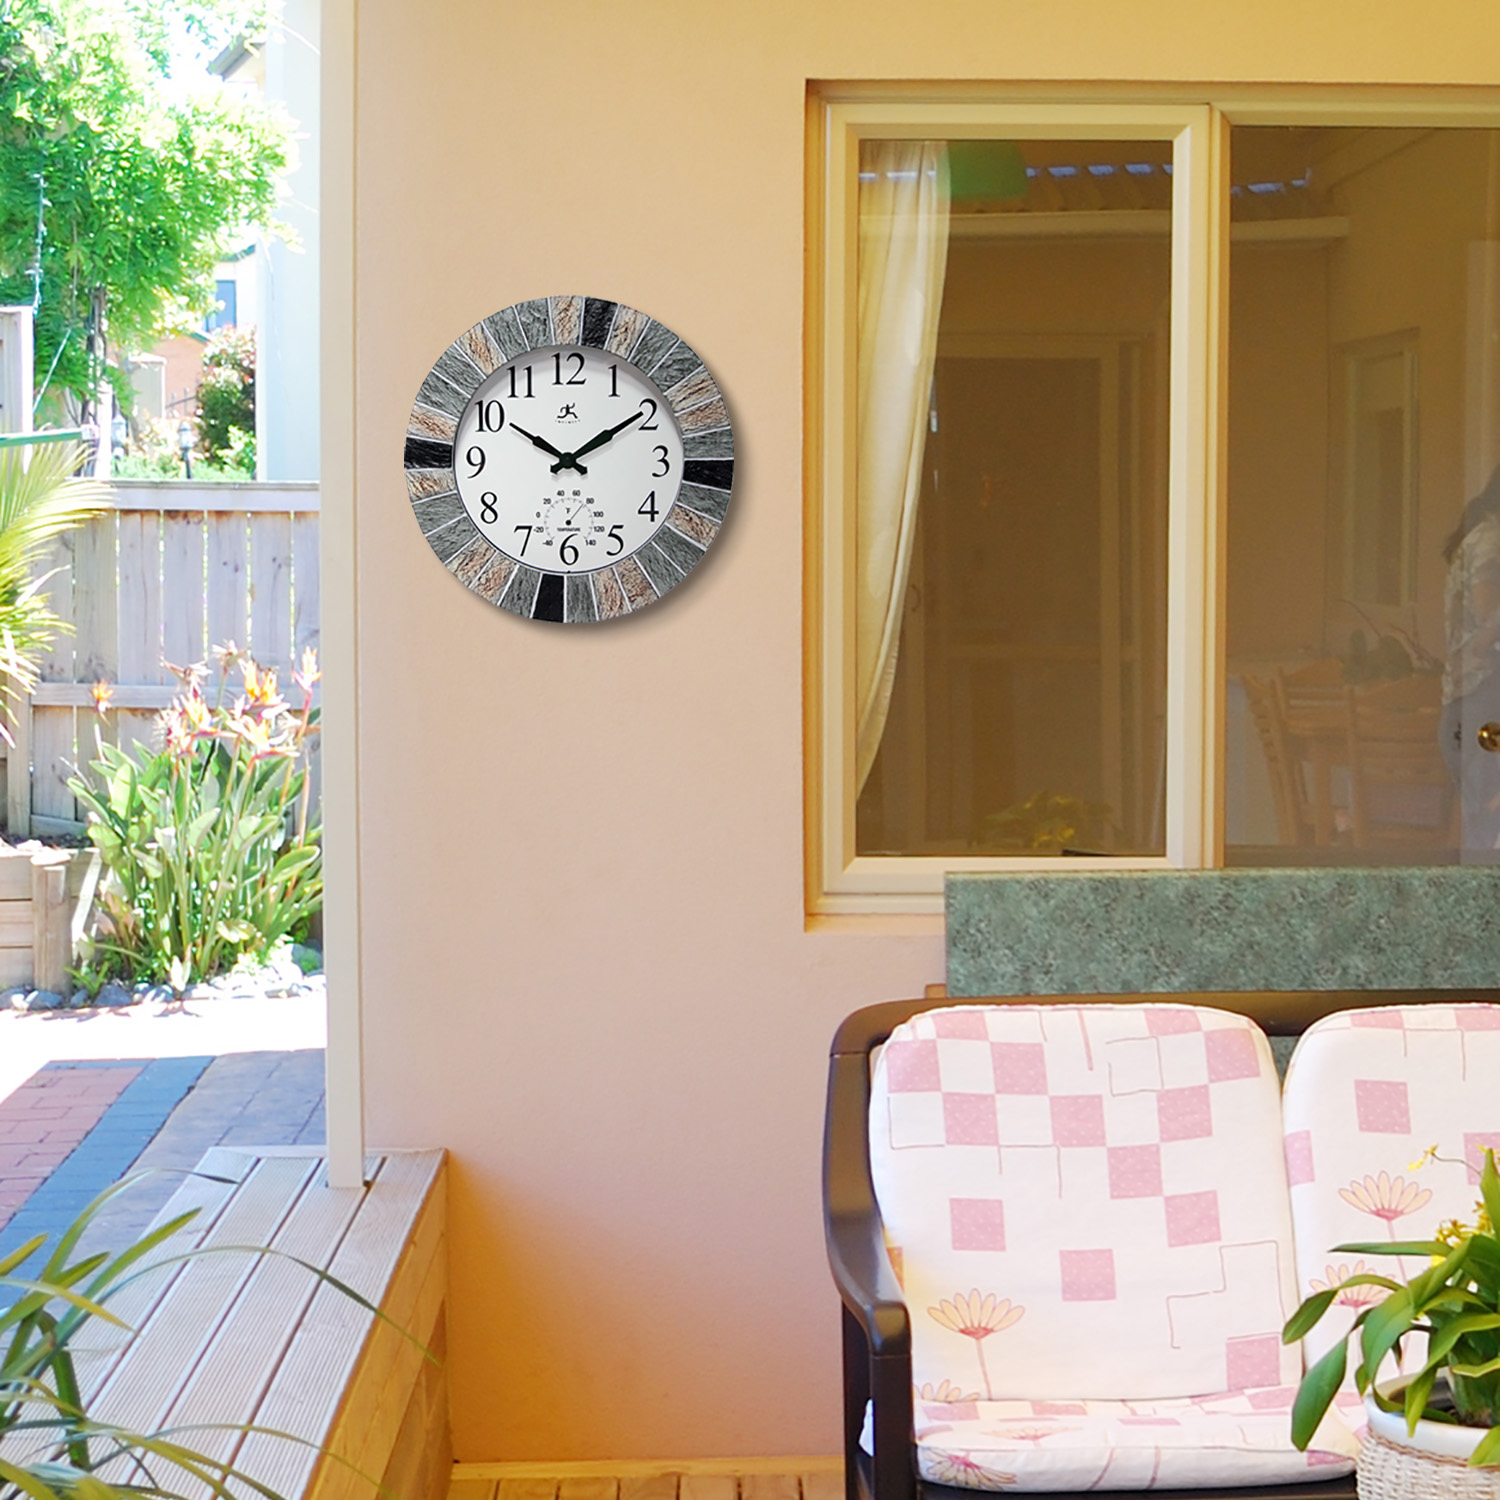 Charleston Side-Mount Indoor/Outdoor Wall Clock Thermometer by